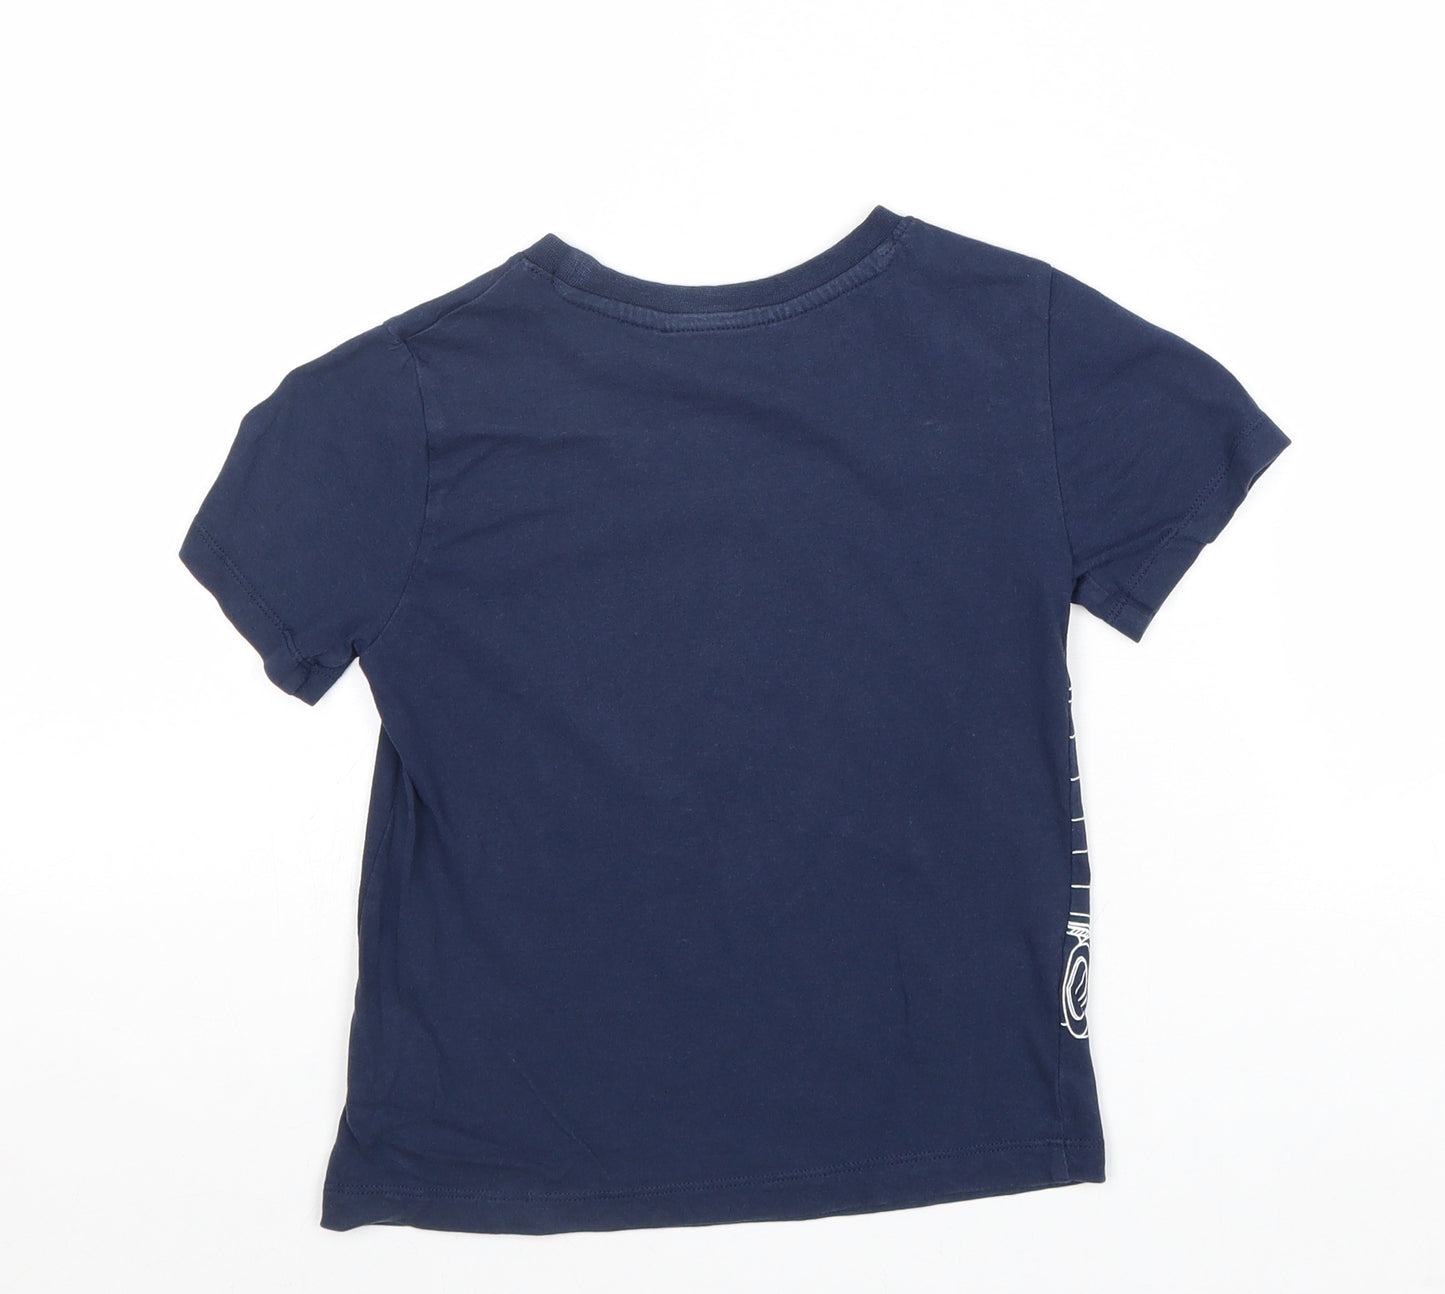 H&M Boys Blue 100% Cotton Basic T-Shirt Size 5-6 Years Round Neck Pullover - Car Vroom Vroom